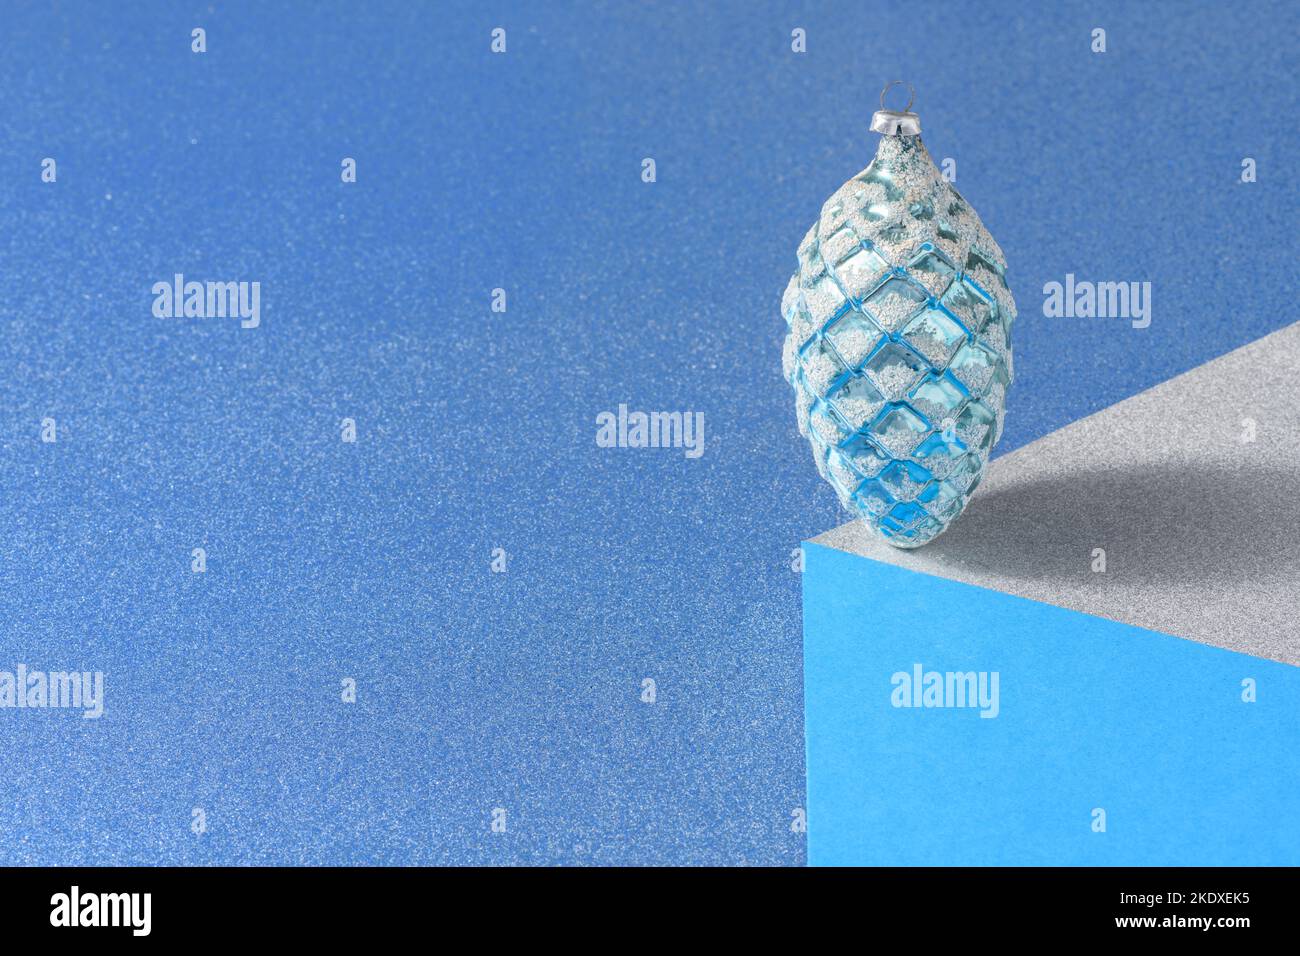 Optical illusion of a vintage christmas bauble in the shape of a pine cone standing in balance on a paper cube against a blue background. Stock Photo